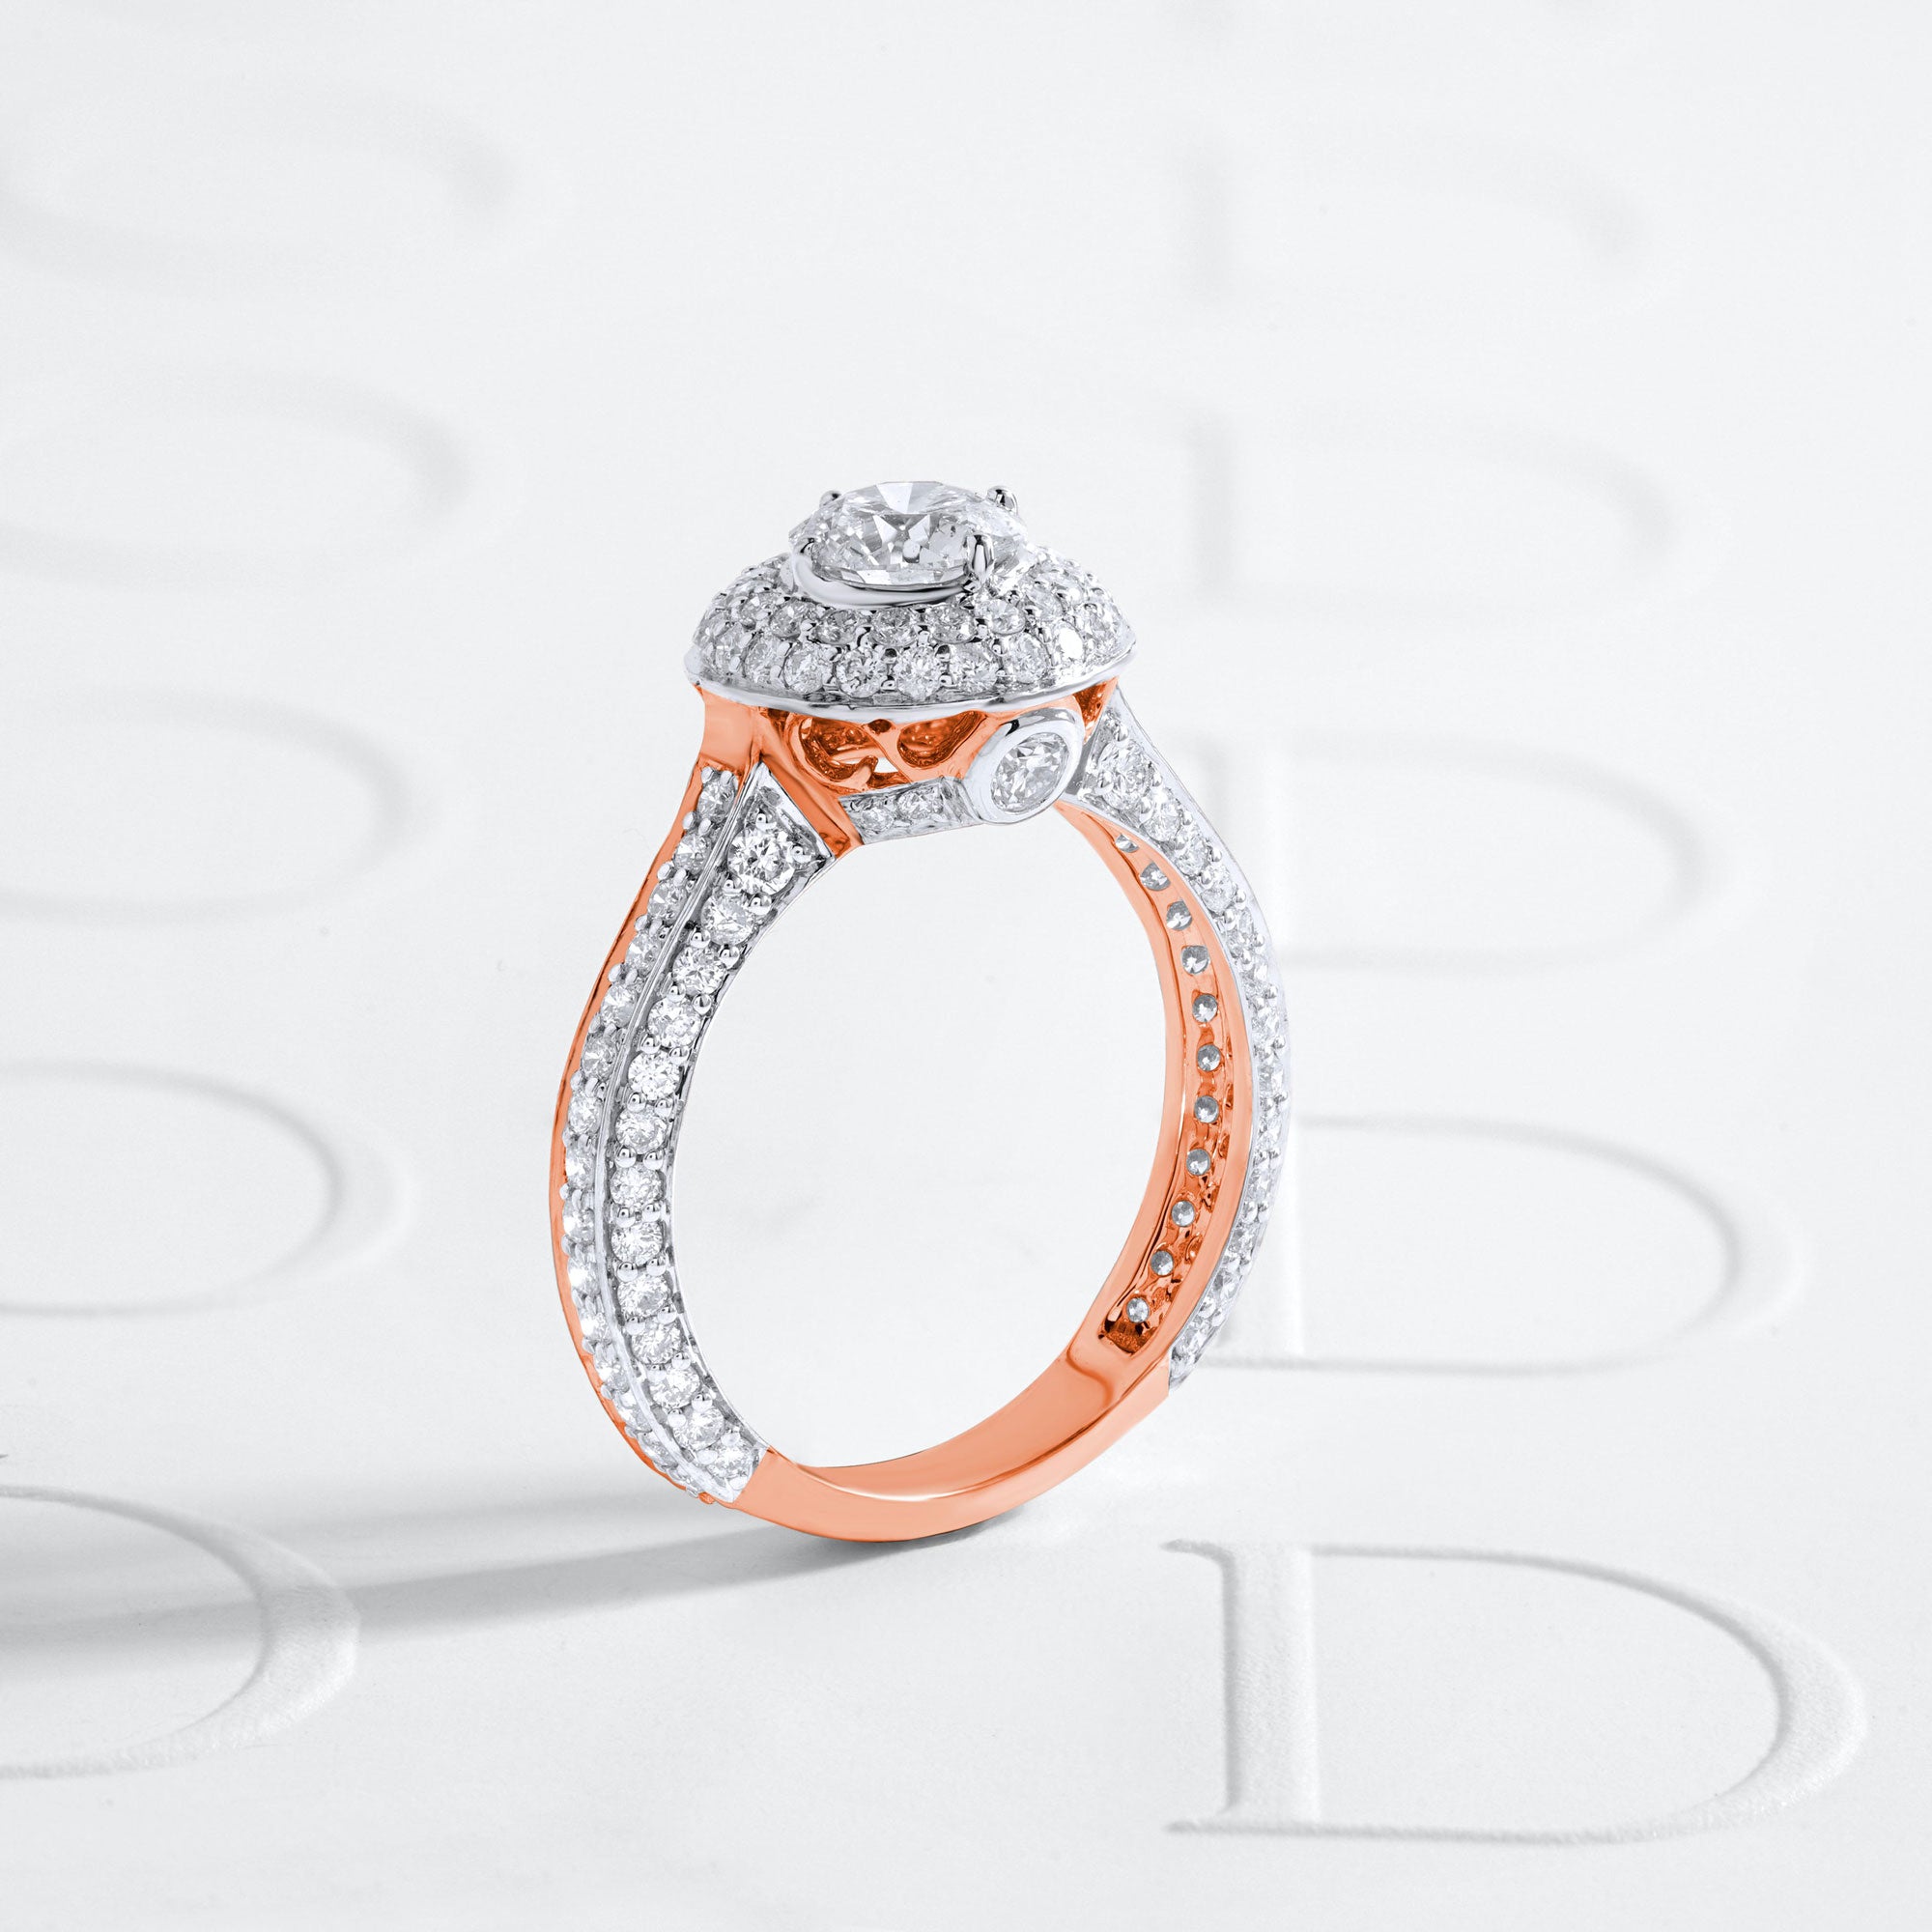 How to Select an Engagement Ring: Determining Quality, Price, and Ring Size